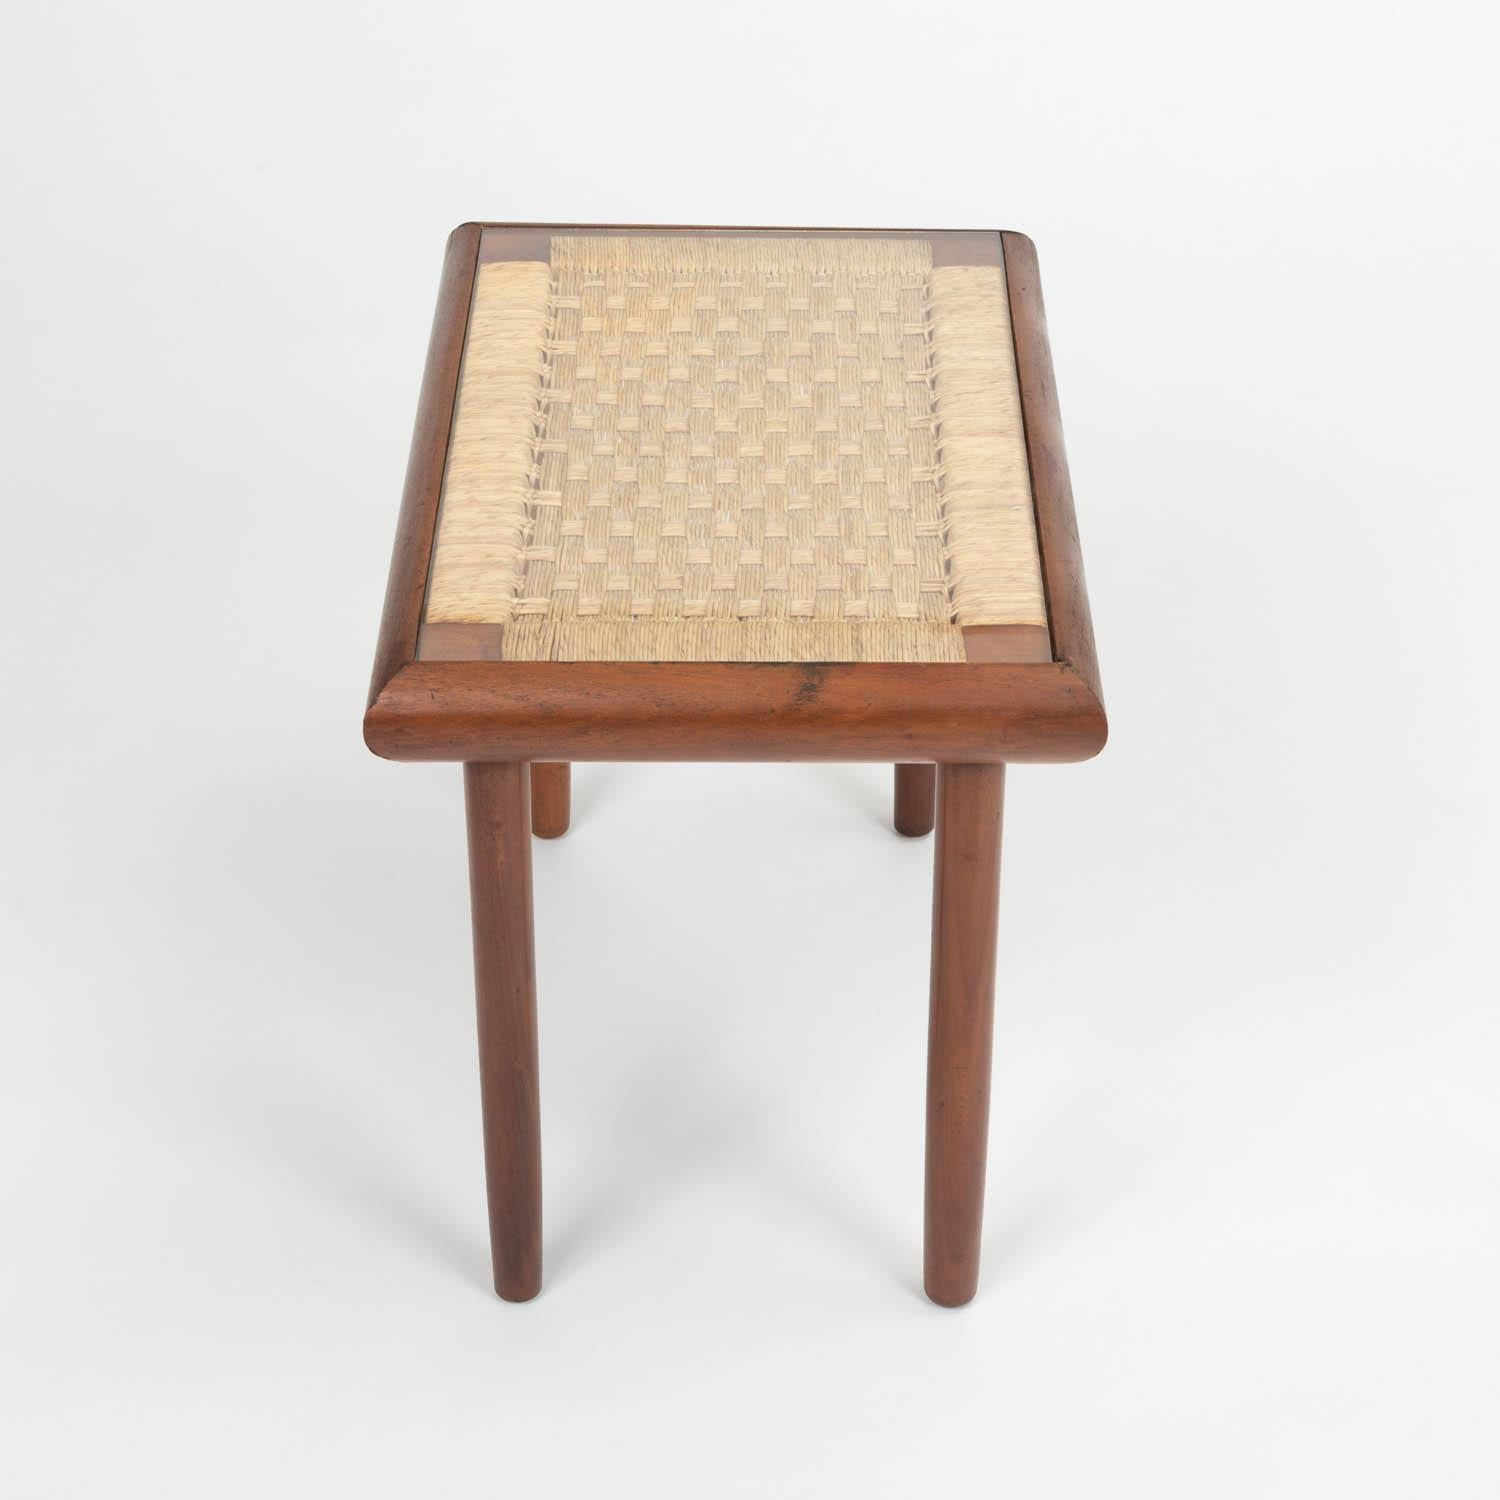 Bauhaus-trained, Mexico City-based Michael van Beuren created highly functional modern design inspired by Mexican vernacular styles and materials. This example is a side table with a rectangular teak frame. The under-frame of the table is strung